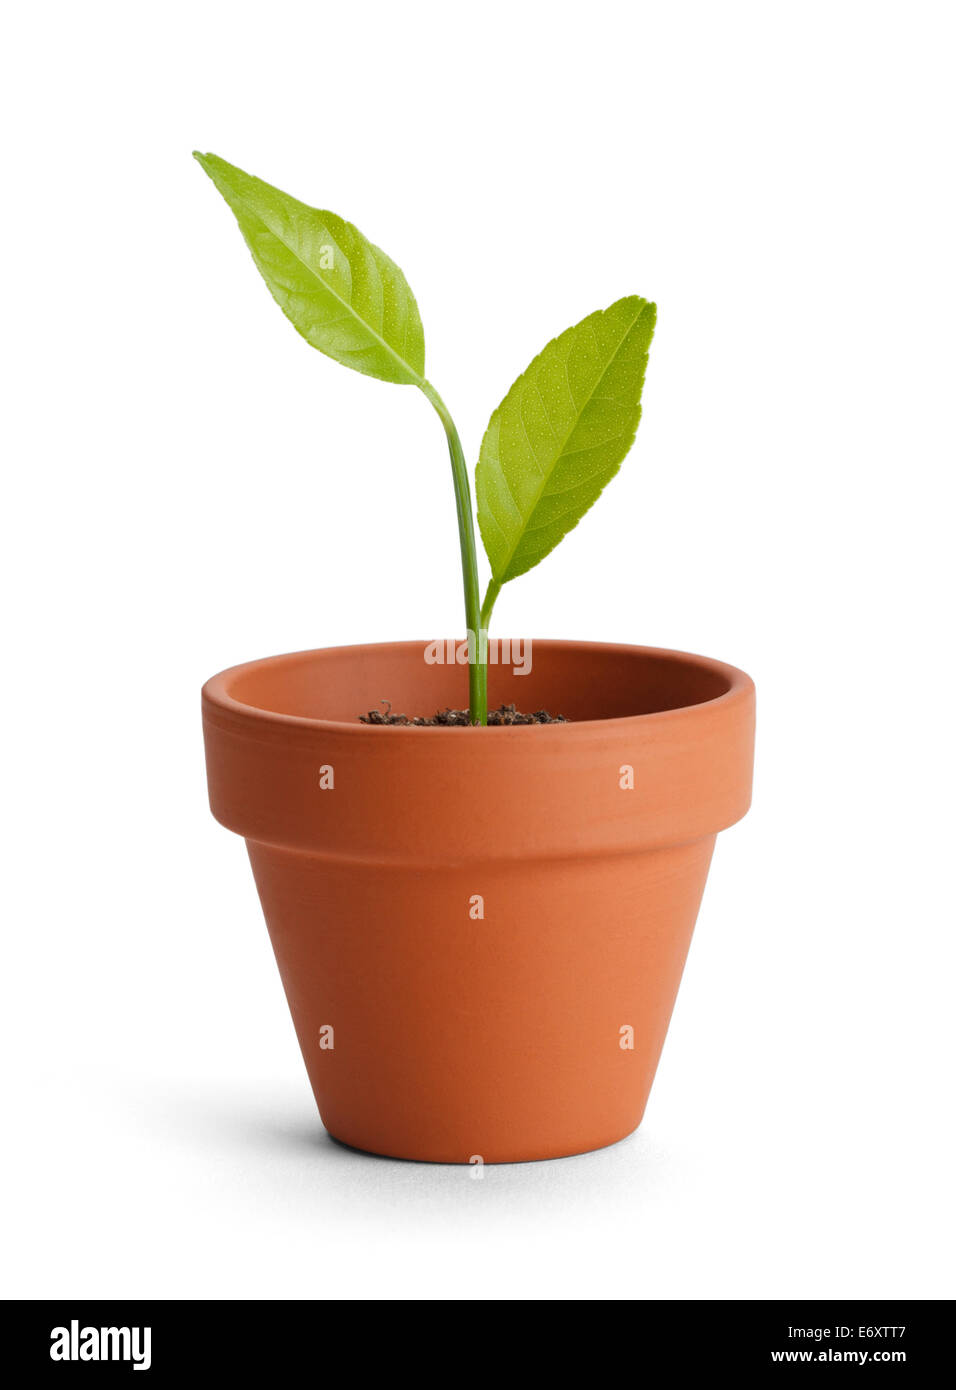 New plant in small orange pot isolated on white background. Stock Photo